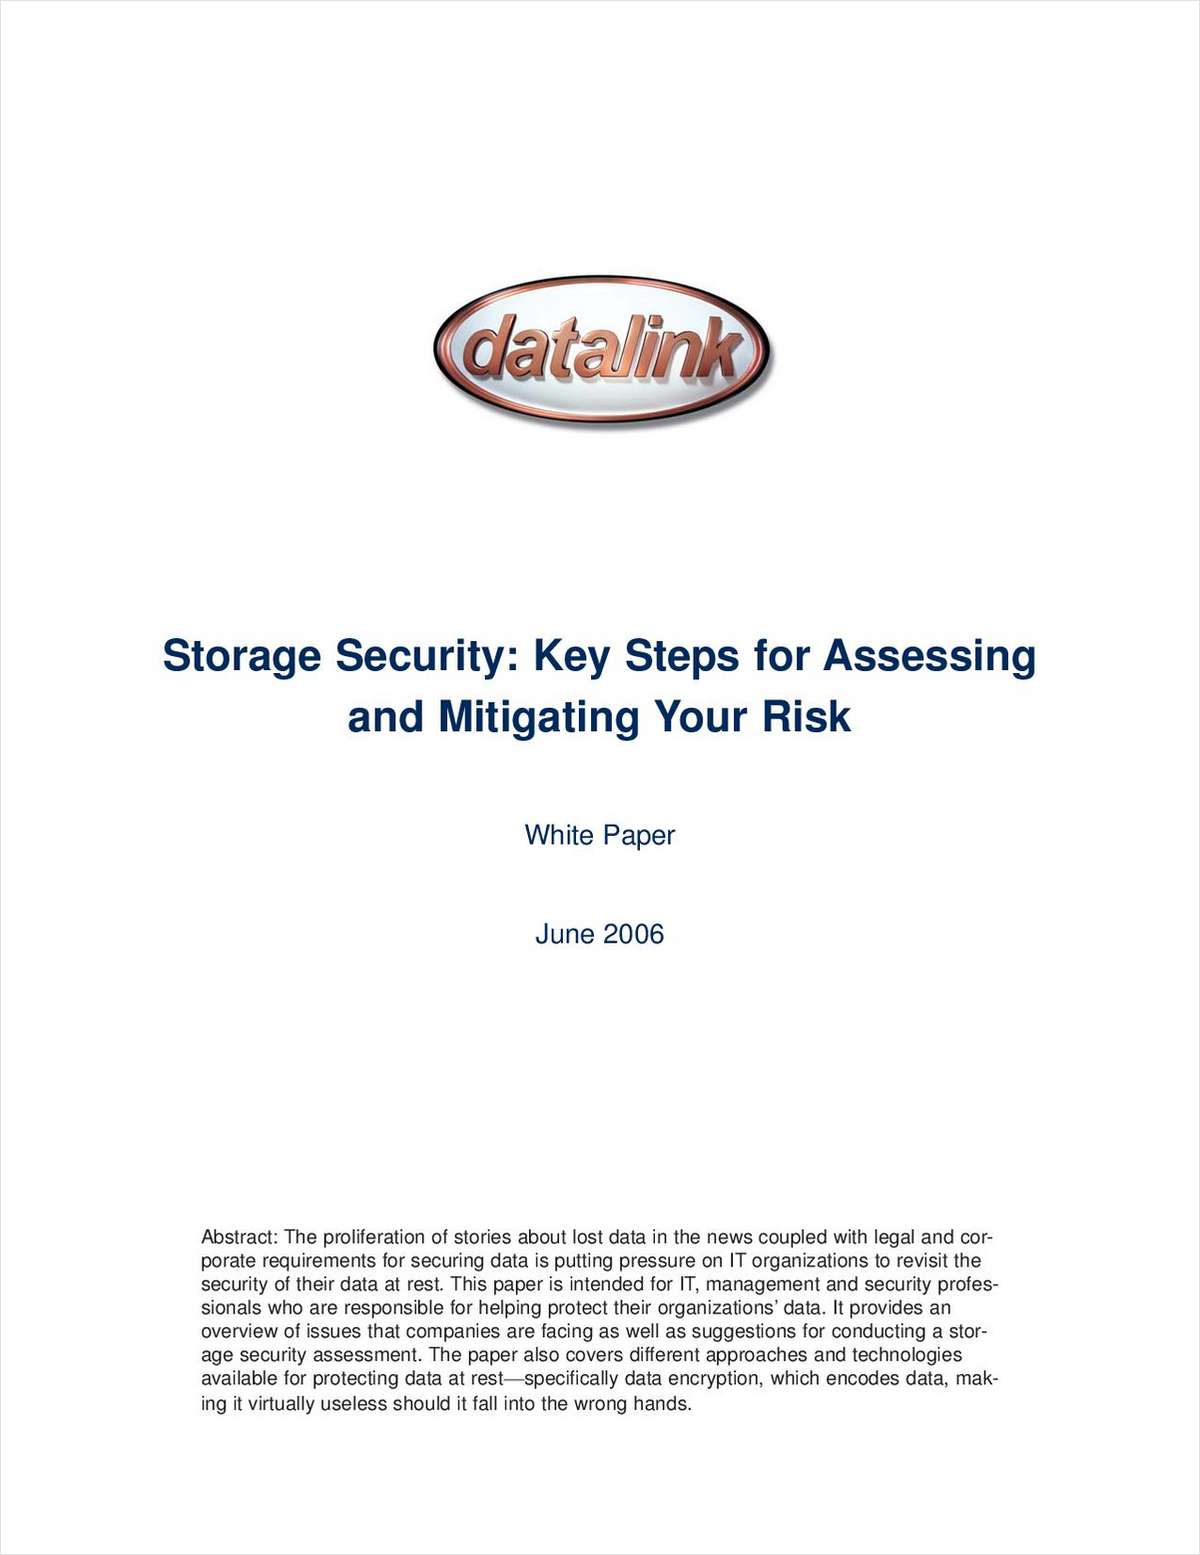 Storage Security: Key Steps for Assessing and Mitigating Your Risk